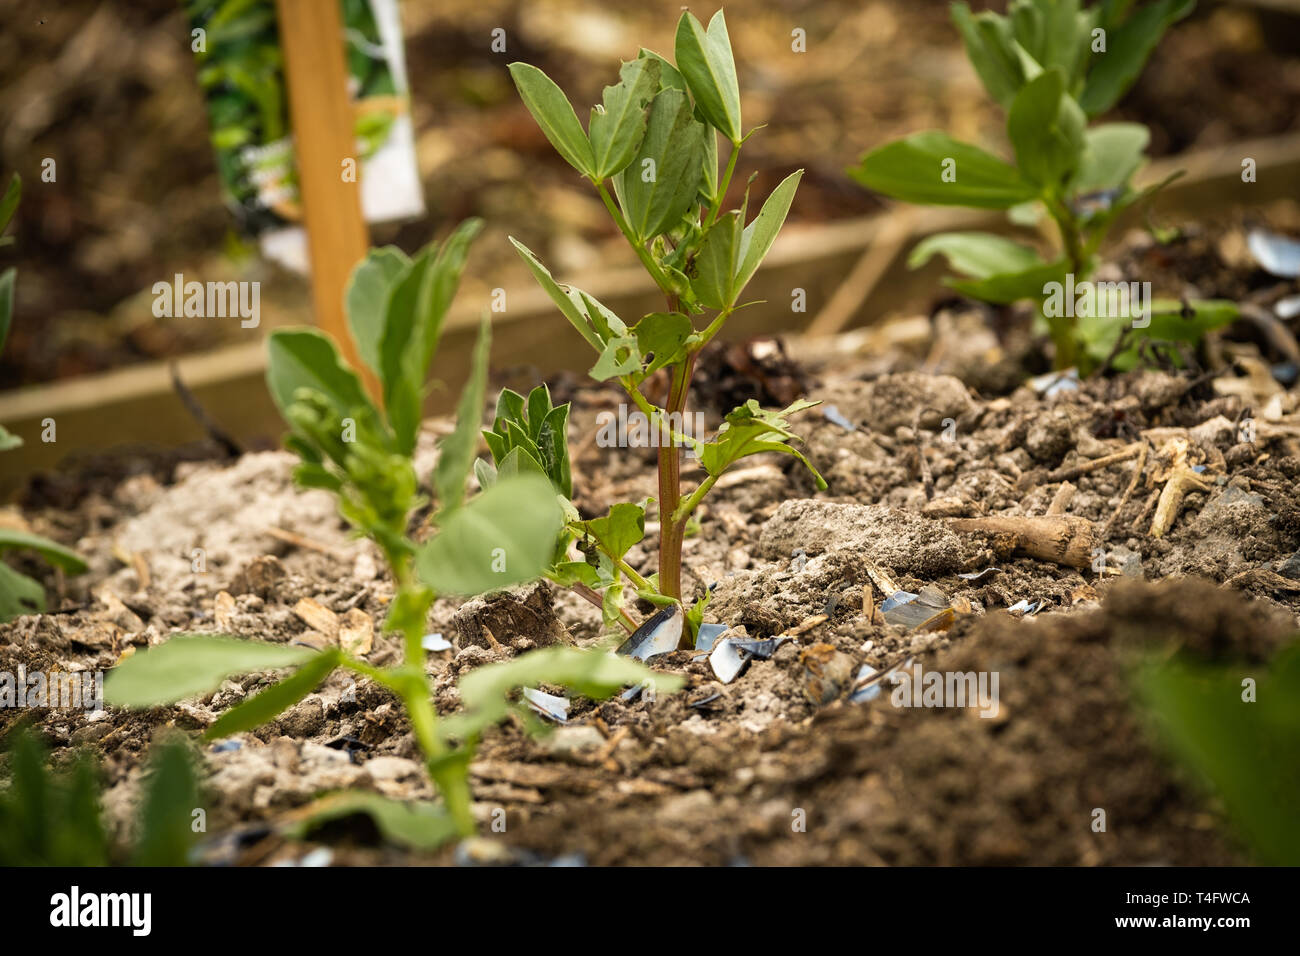 Vegetable gardening in the UK - young broad bean plants in a raised bed on an allotment garden surrounded by a dusting of fresh wood ash and crushed mussel shells to protect them from being eaten by slugs Stock Photo